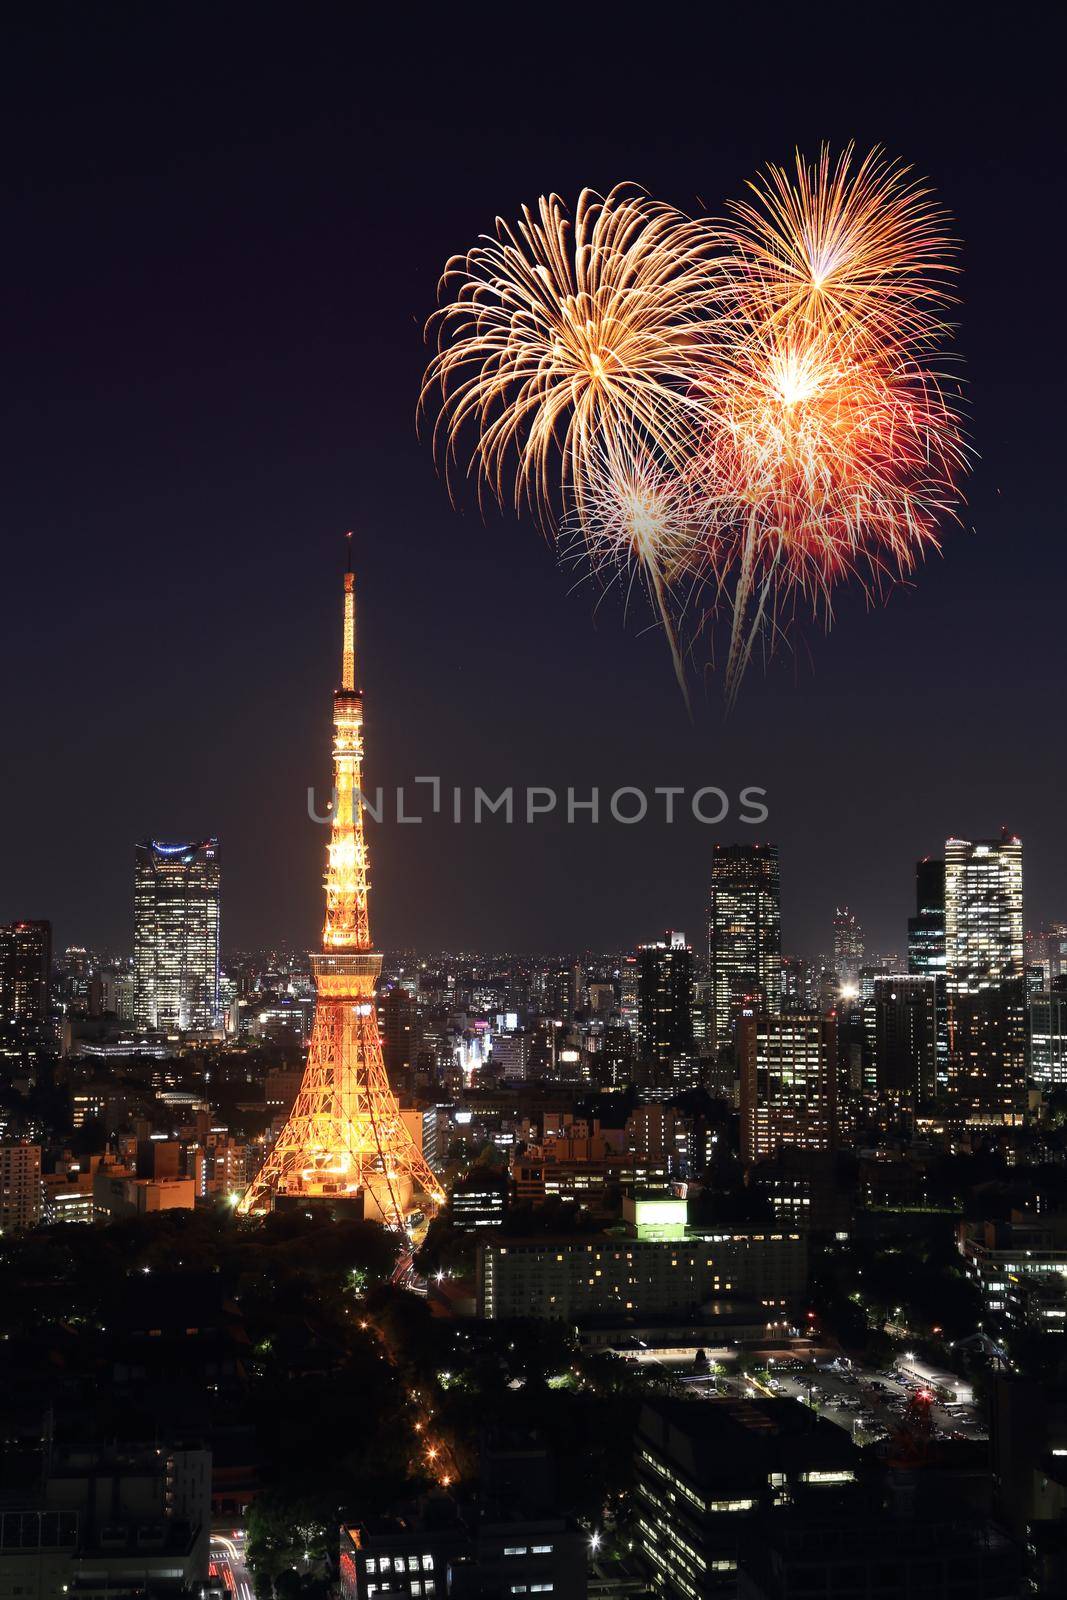 Fireworks celebrating over Tokyo cityscape at night by geargodz